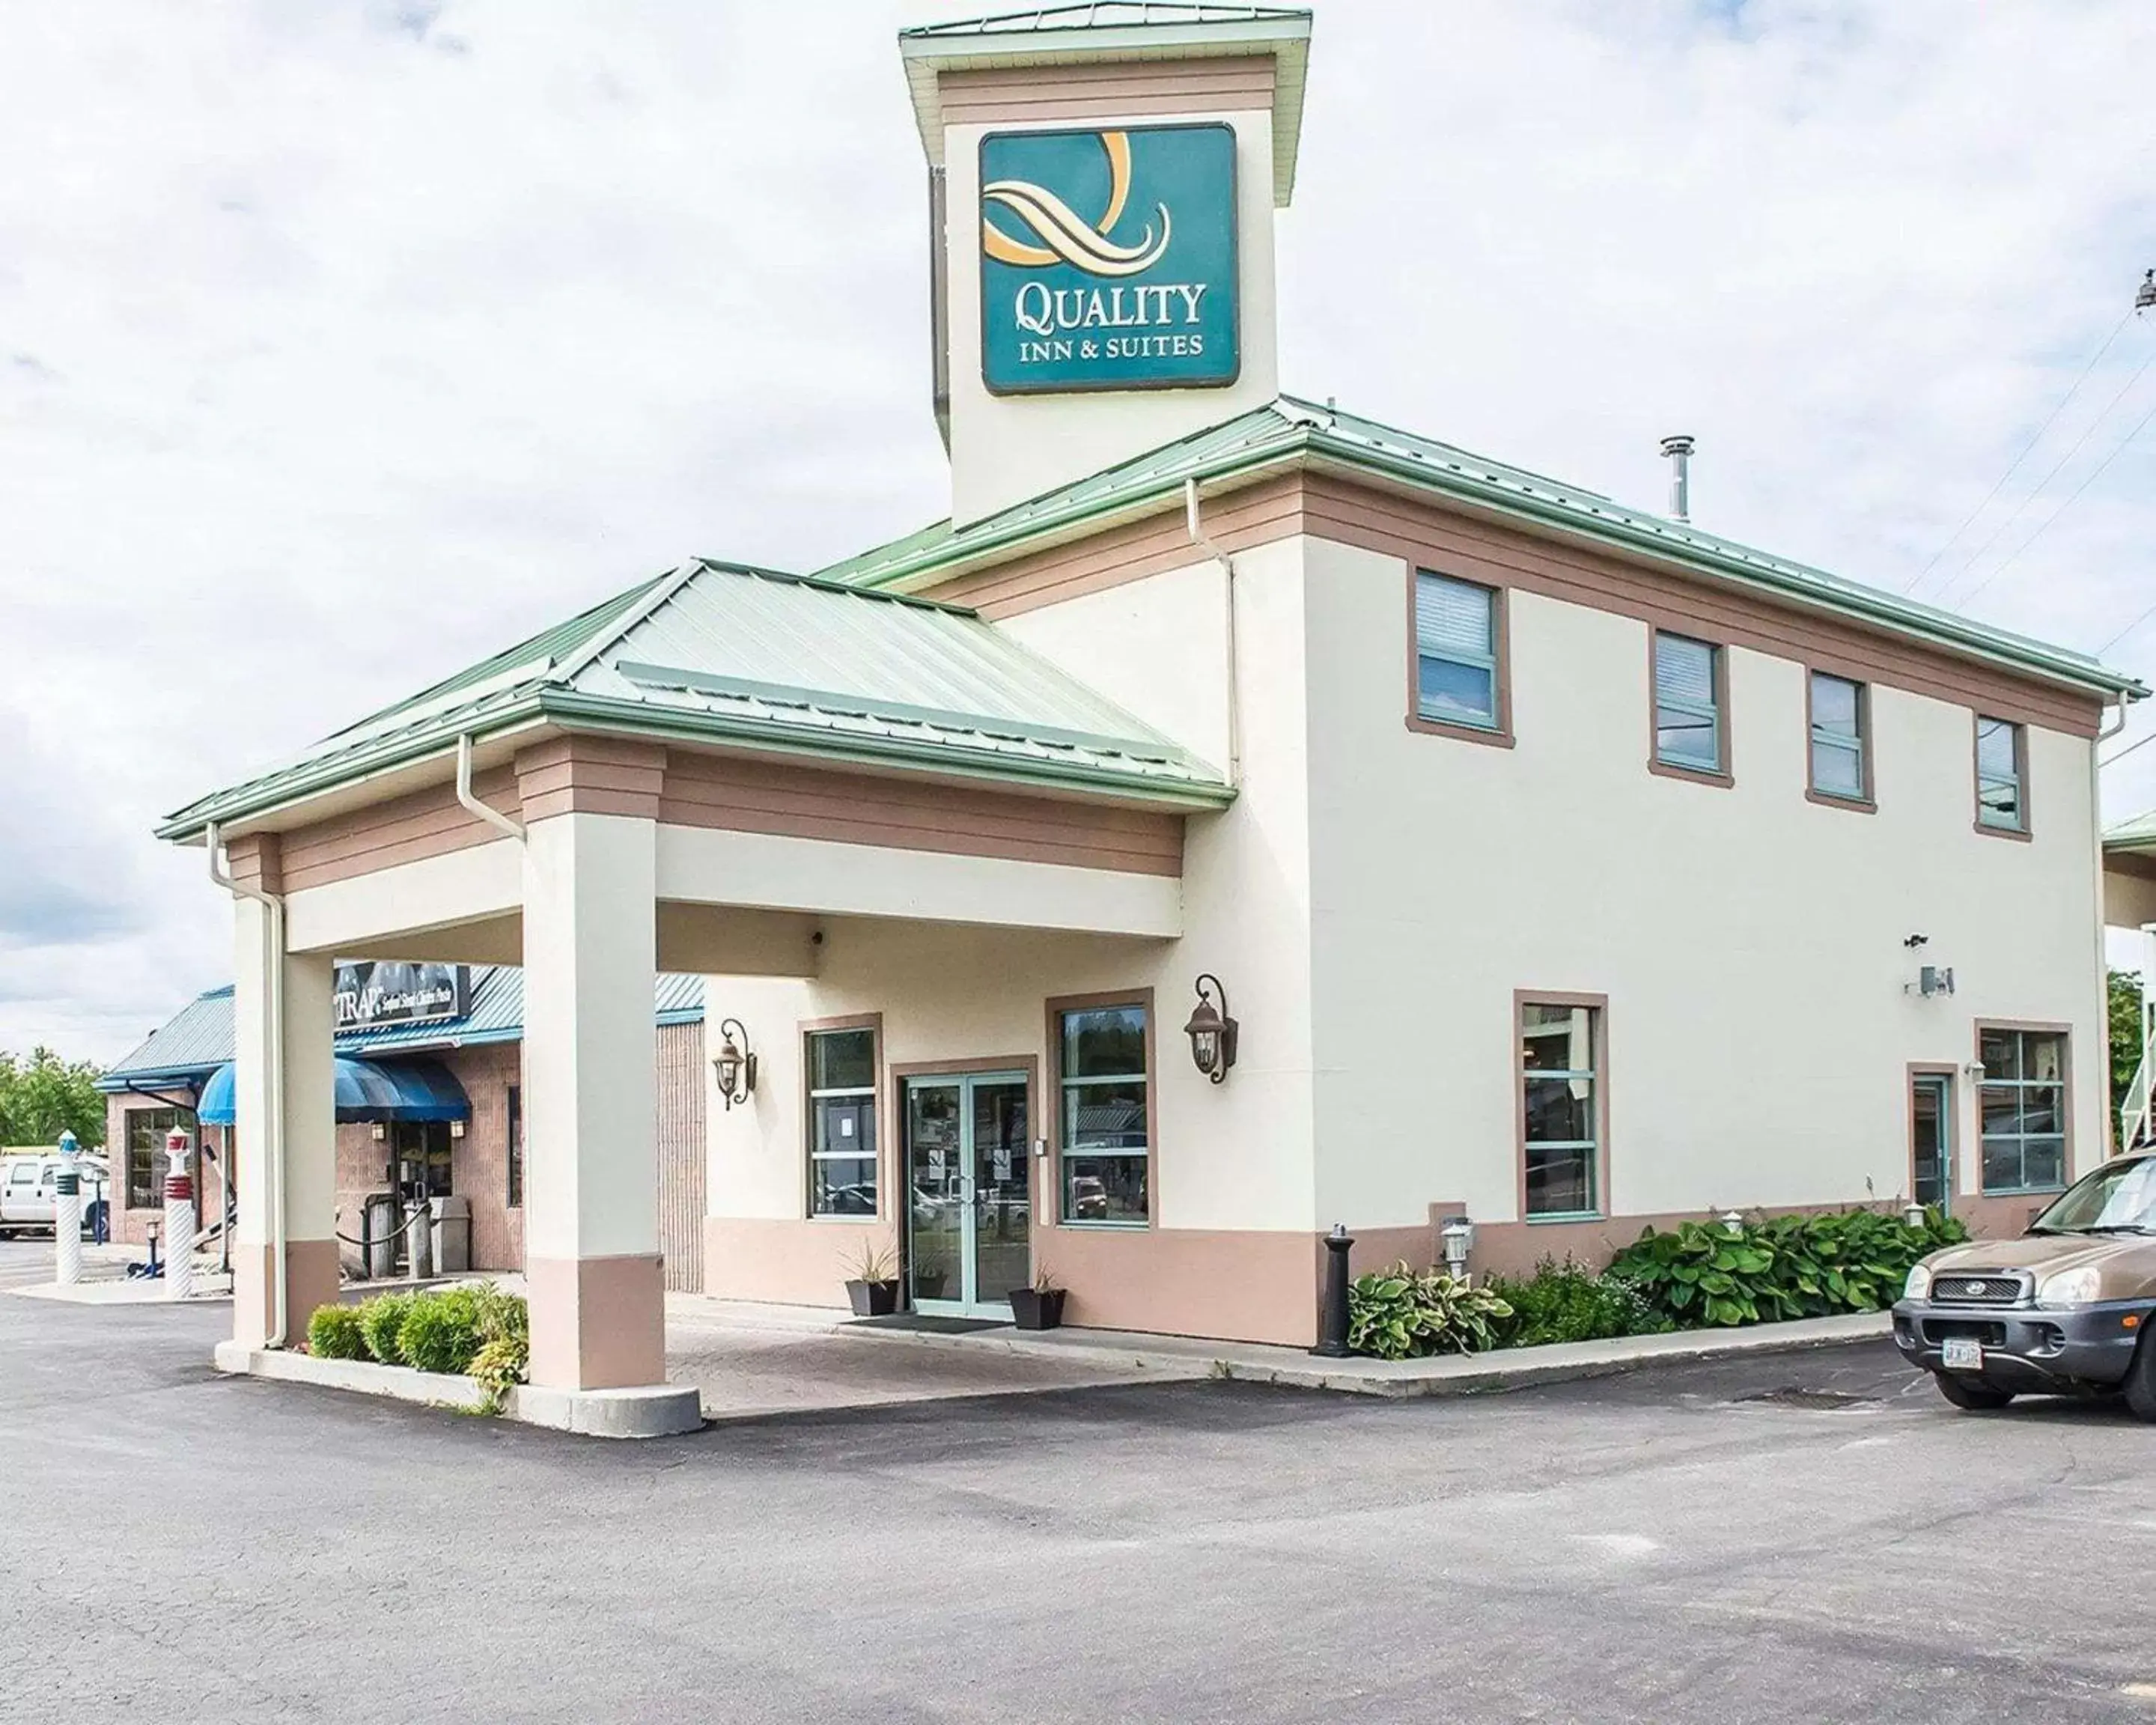 Property Building in Quality Inn & Suites 1000 Islands